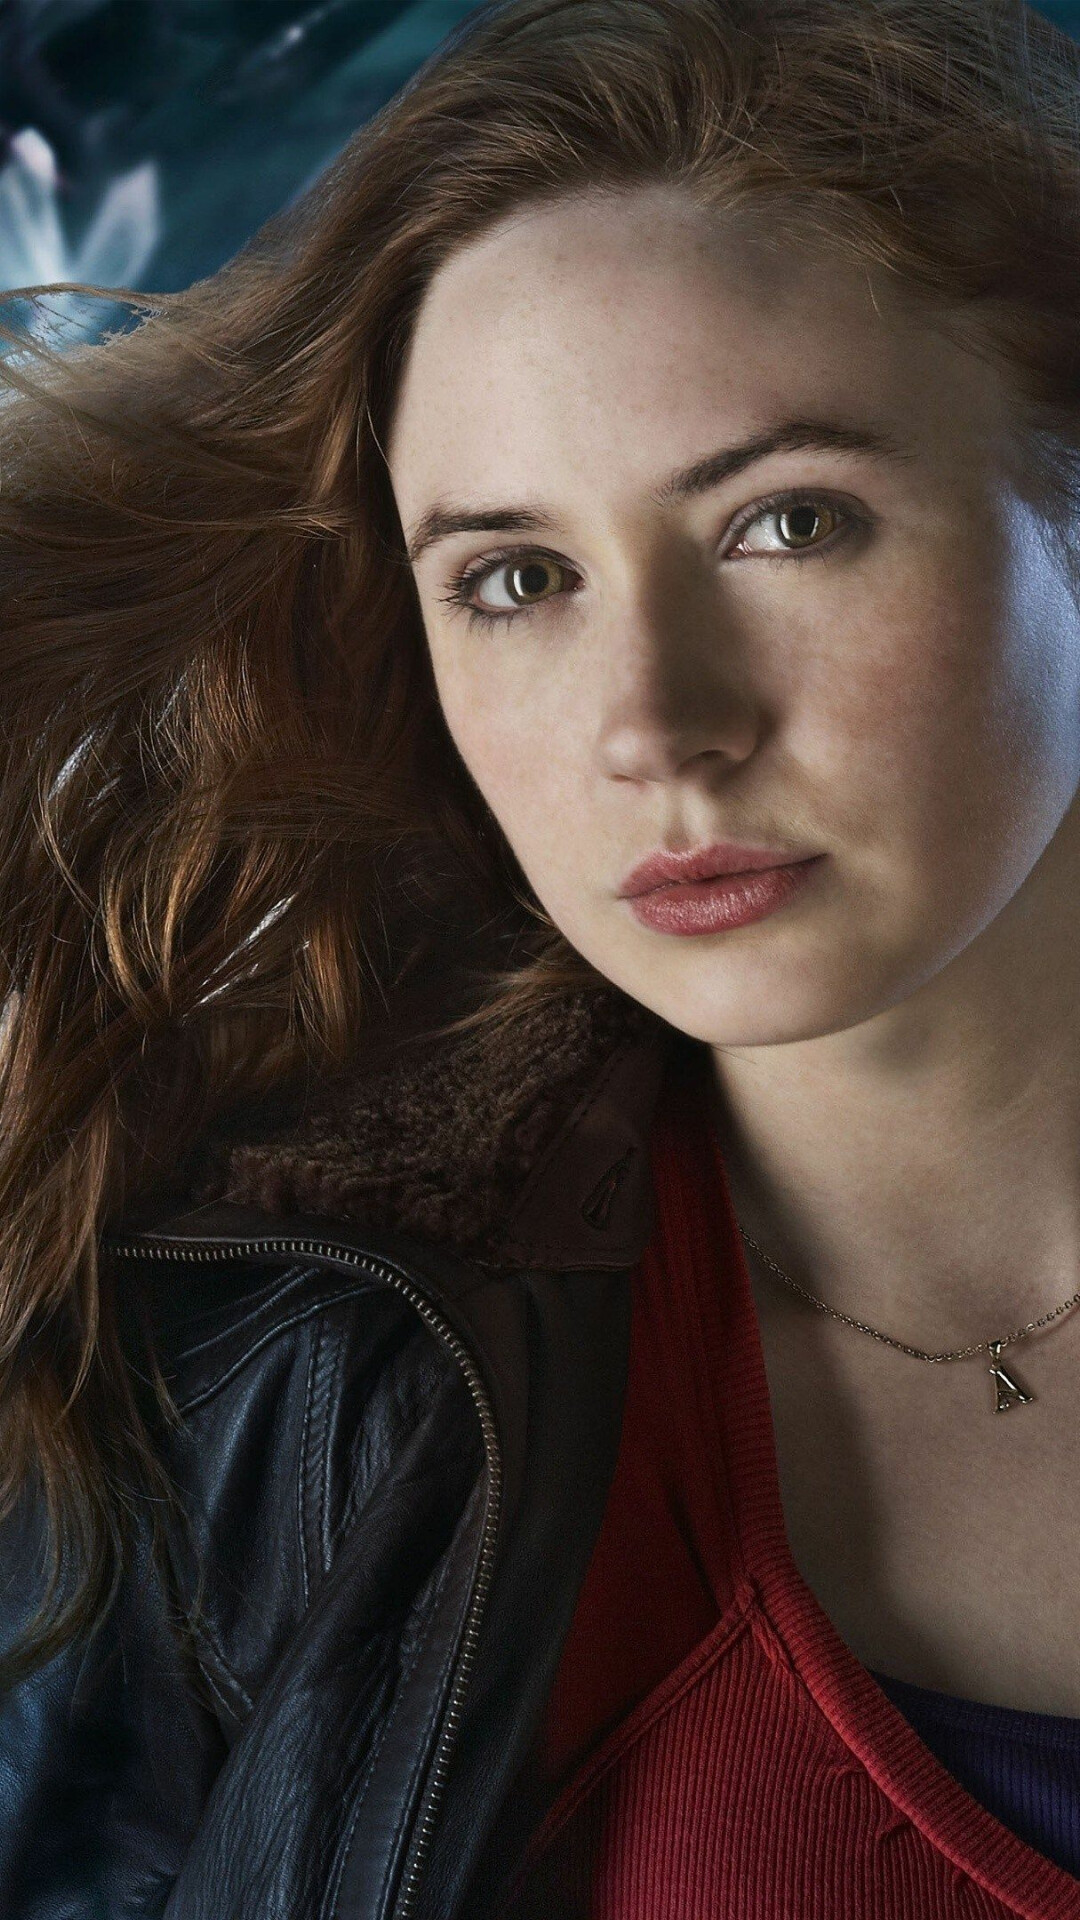 Doctor Who: Amy Pond, A fictional character portrayed by Karen Gillan in the long-running British science fiction television series. 1080x1920 Full HD Wallpaper.